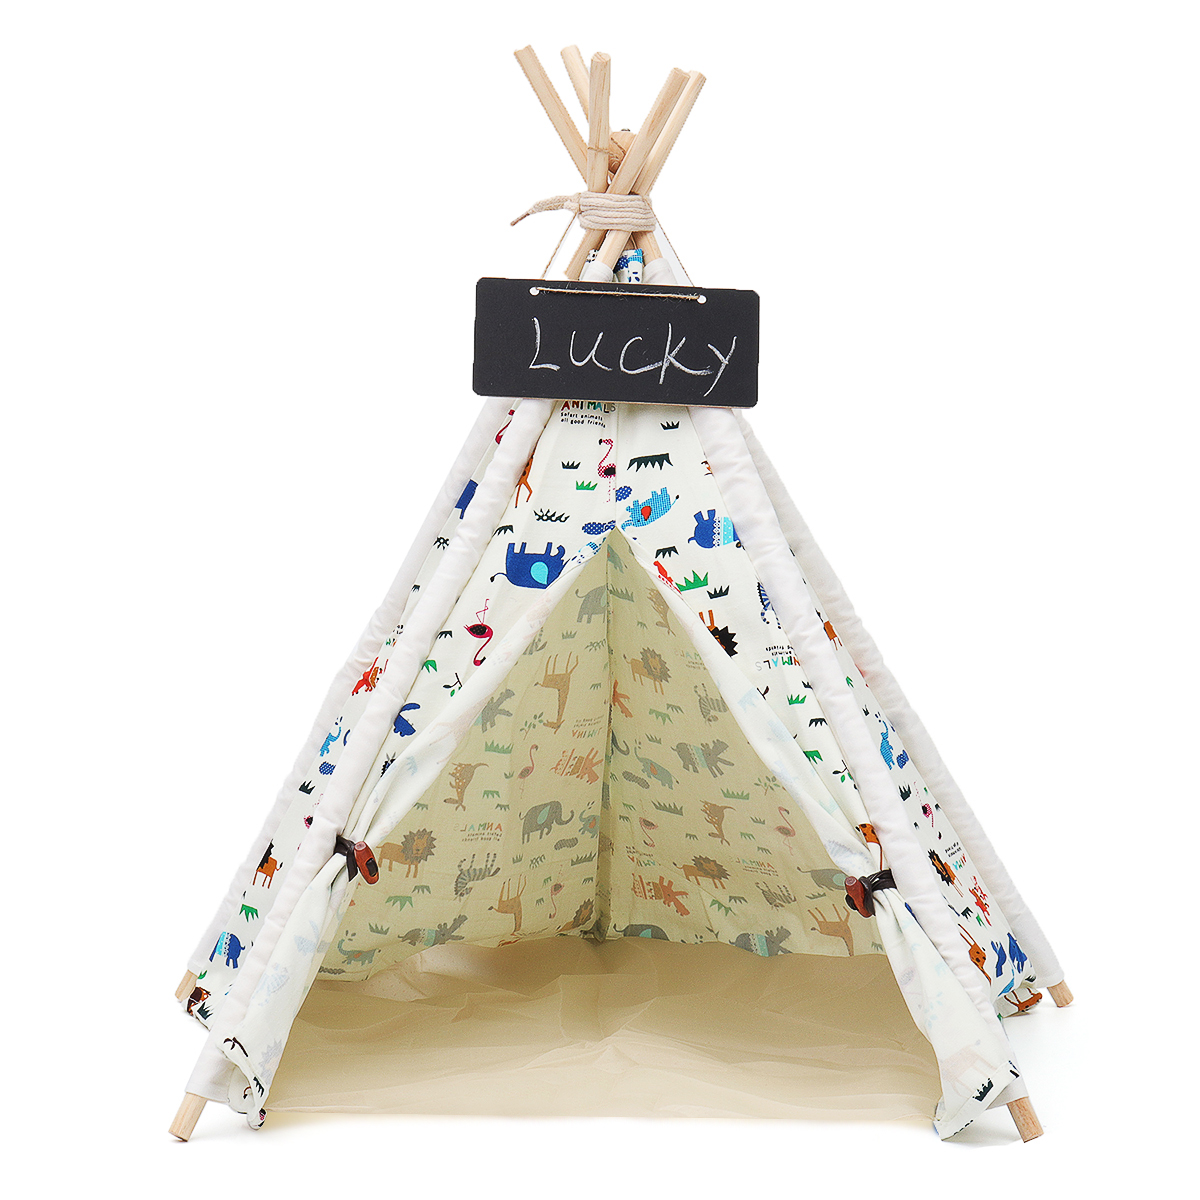 Pet-Dog-House-Washable-Tent-Puppy-Cat-Indoor-Outdoor-Home-Play-Teepee--Pet-Bed-1346120-4